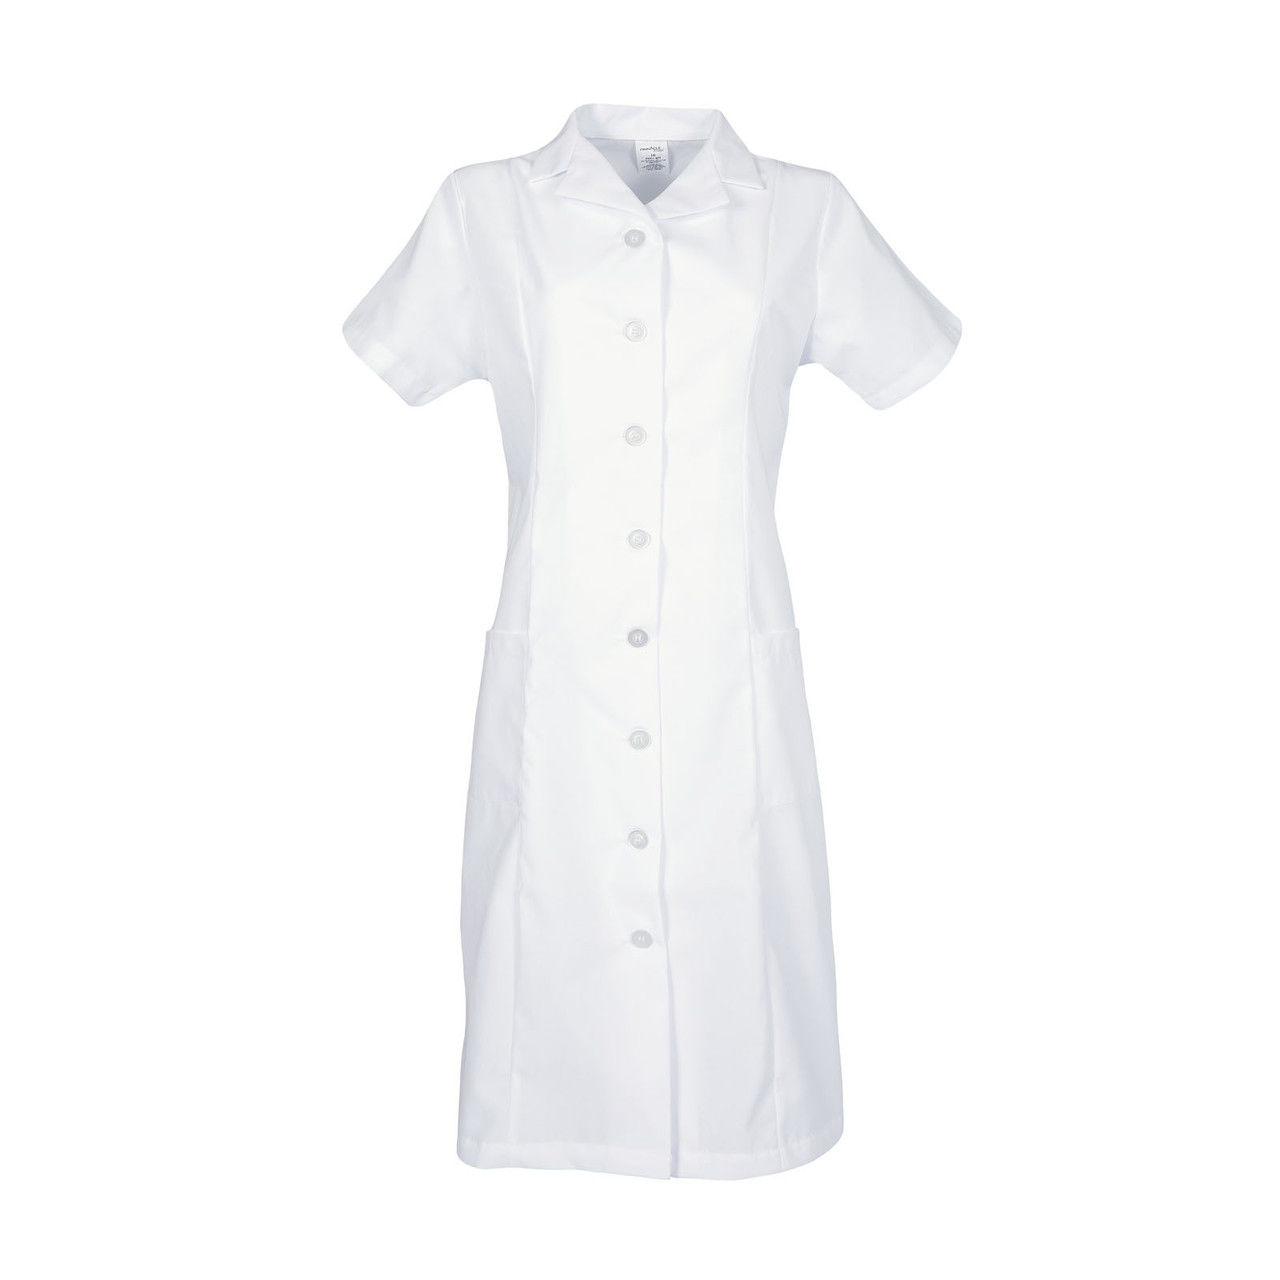 How is the white uniform dress designed?